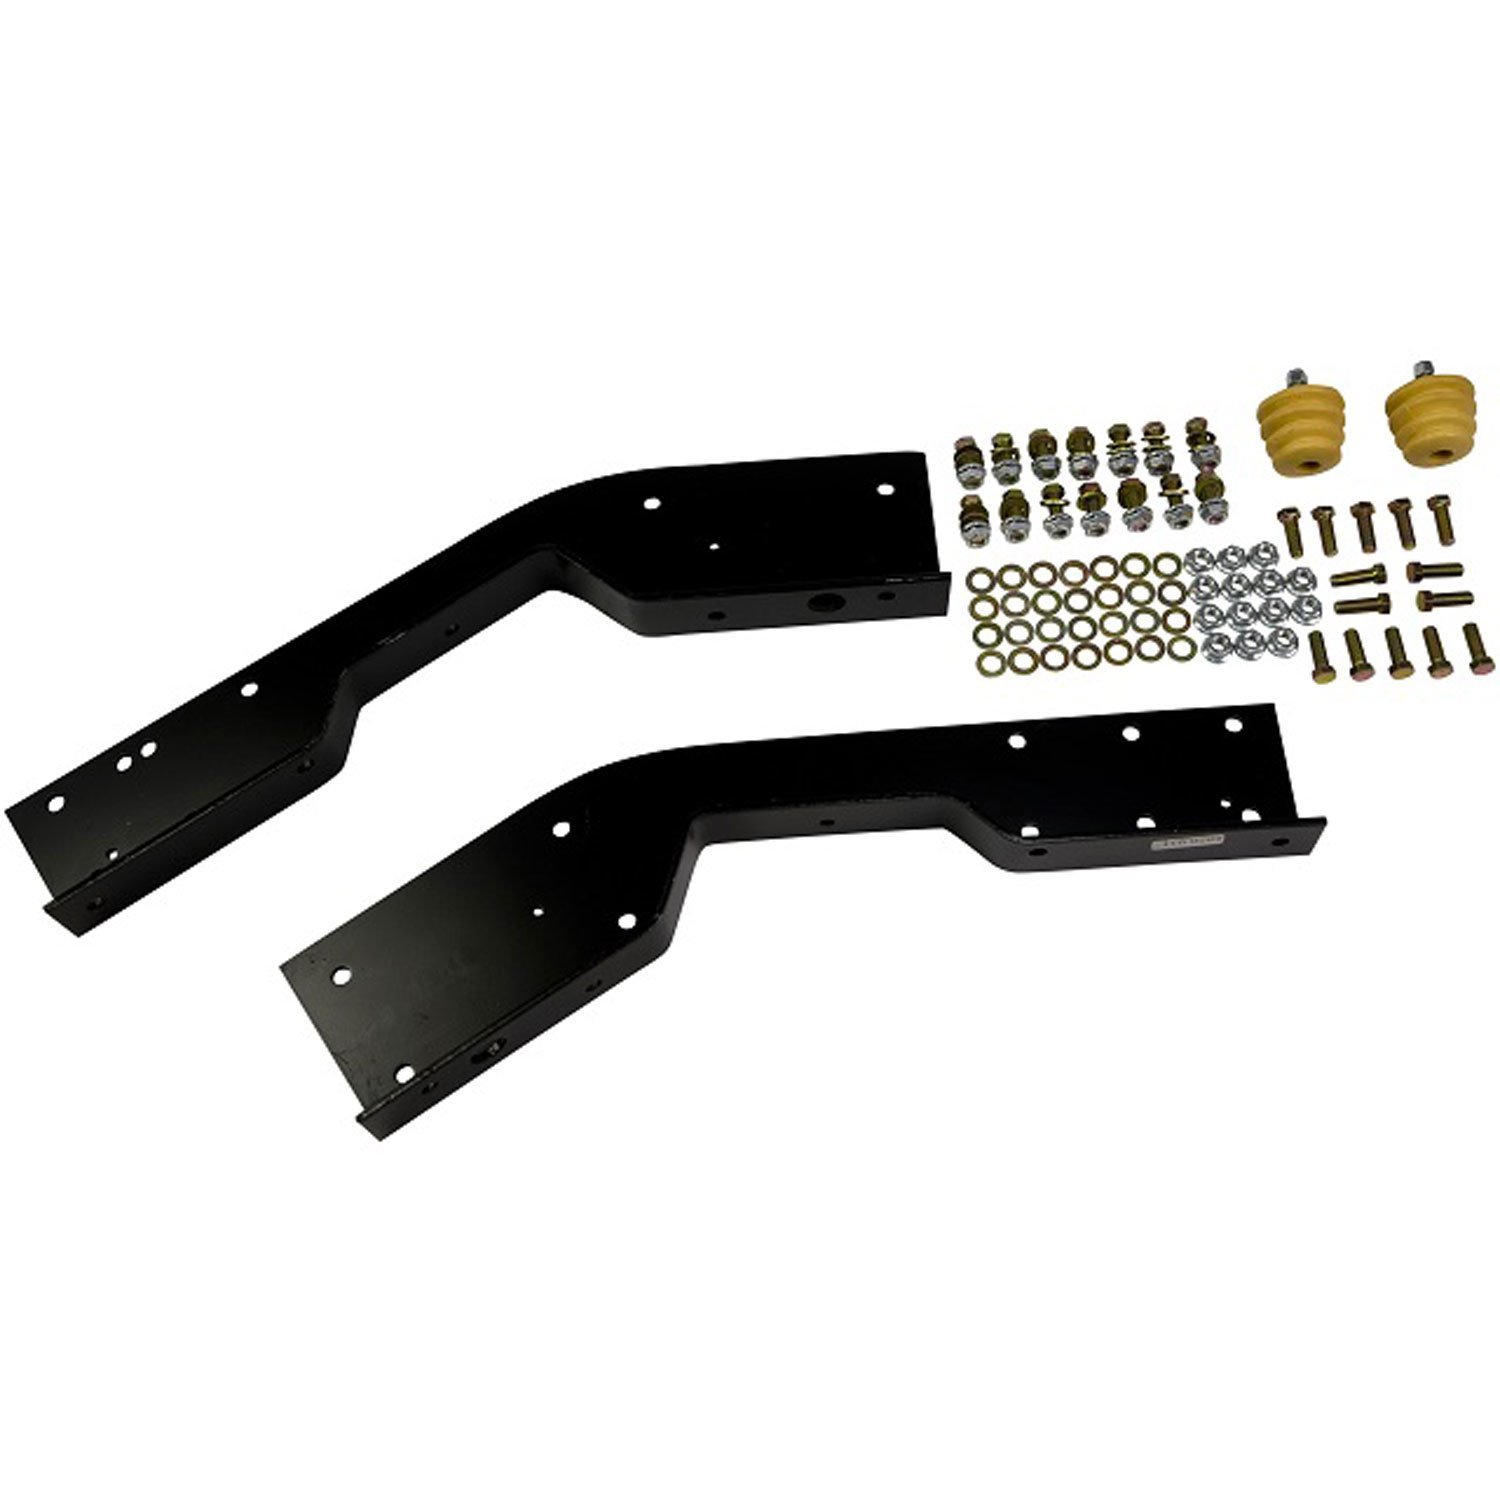 C-Notch Kit for 1992-1999 Chevy Suburban